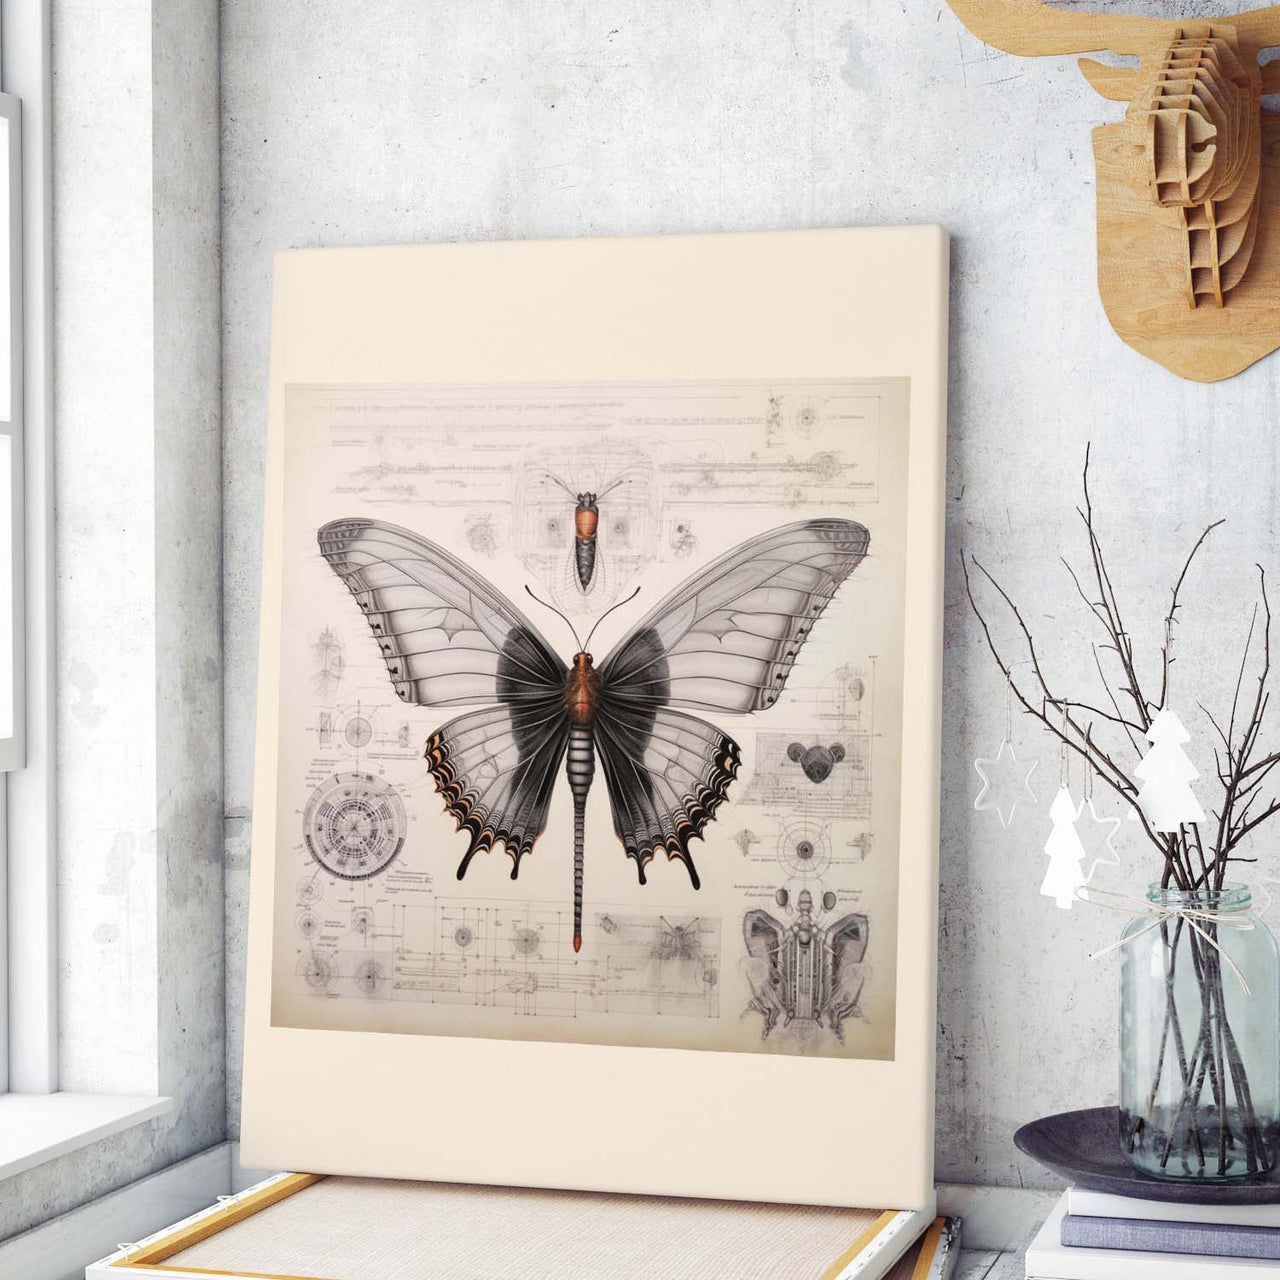 Drawings Butterfly 03 Da Vinci Style Vintage Framed Canvas Prints Wall Art Hanging Home Decor